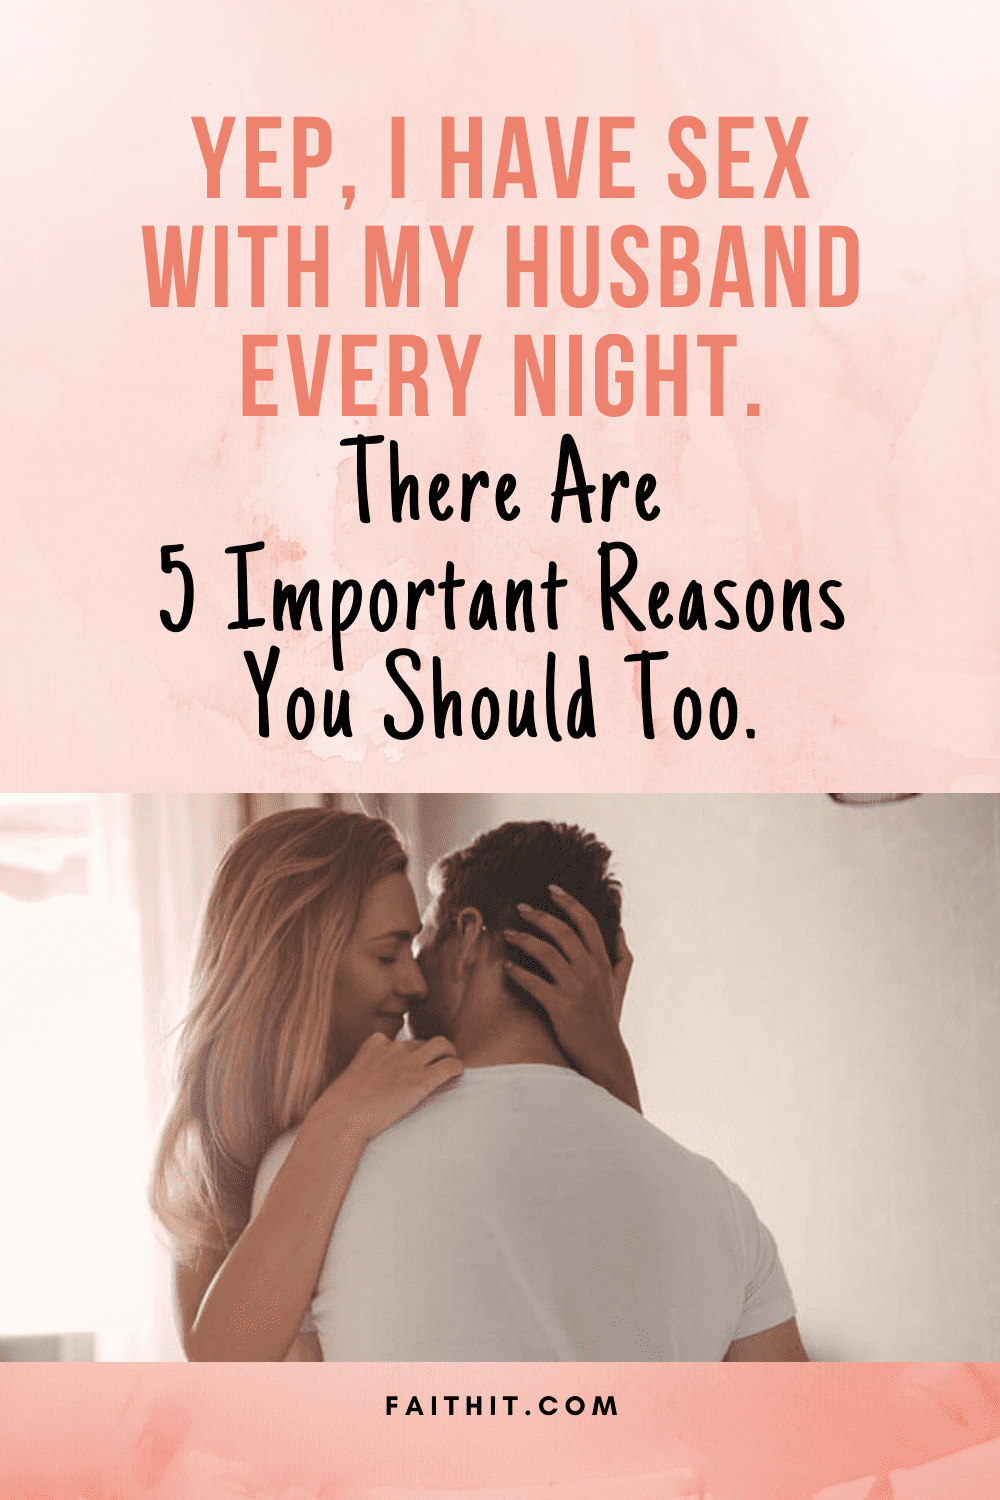 Yep I Have Sex With My Husband Every Night There Are Important Reasons You Should Too